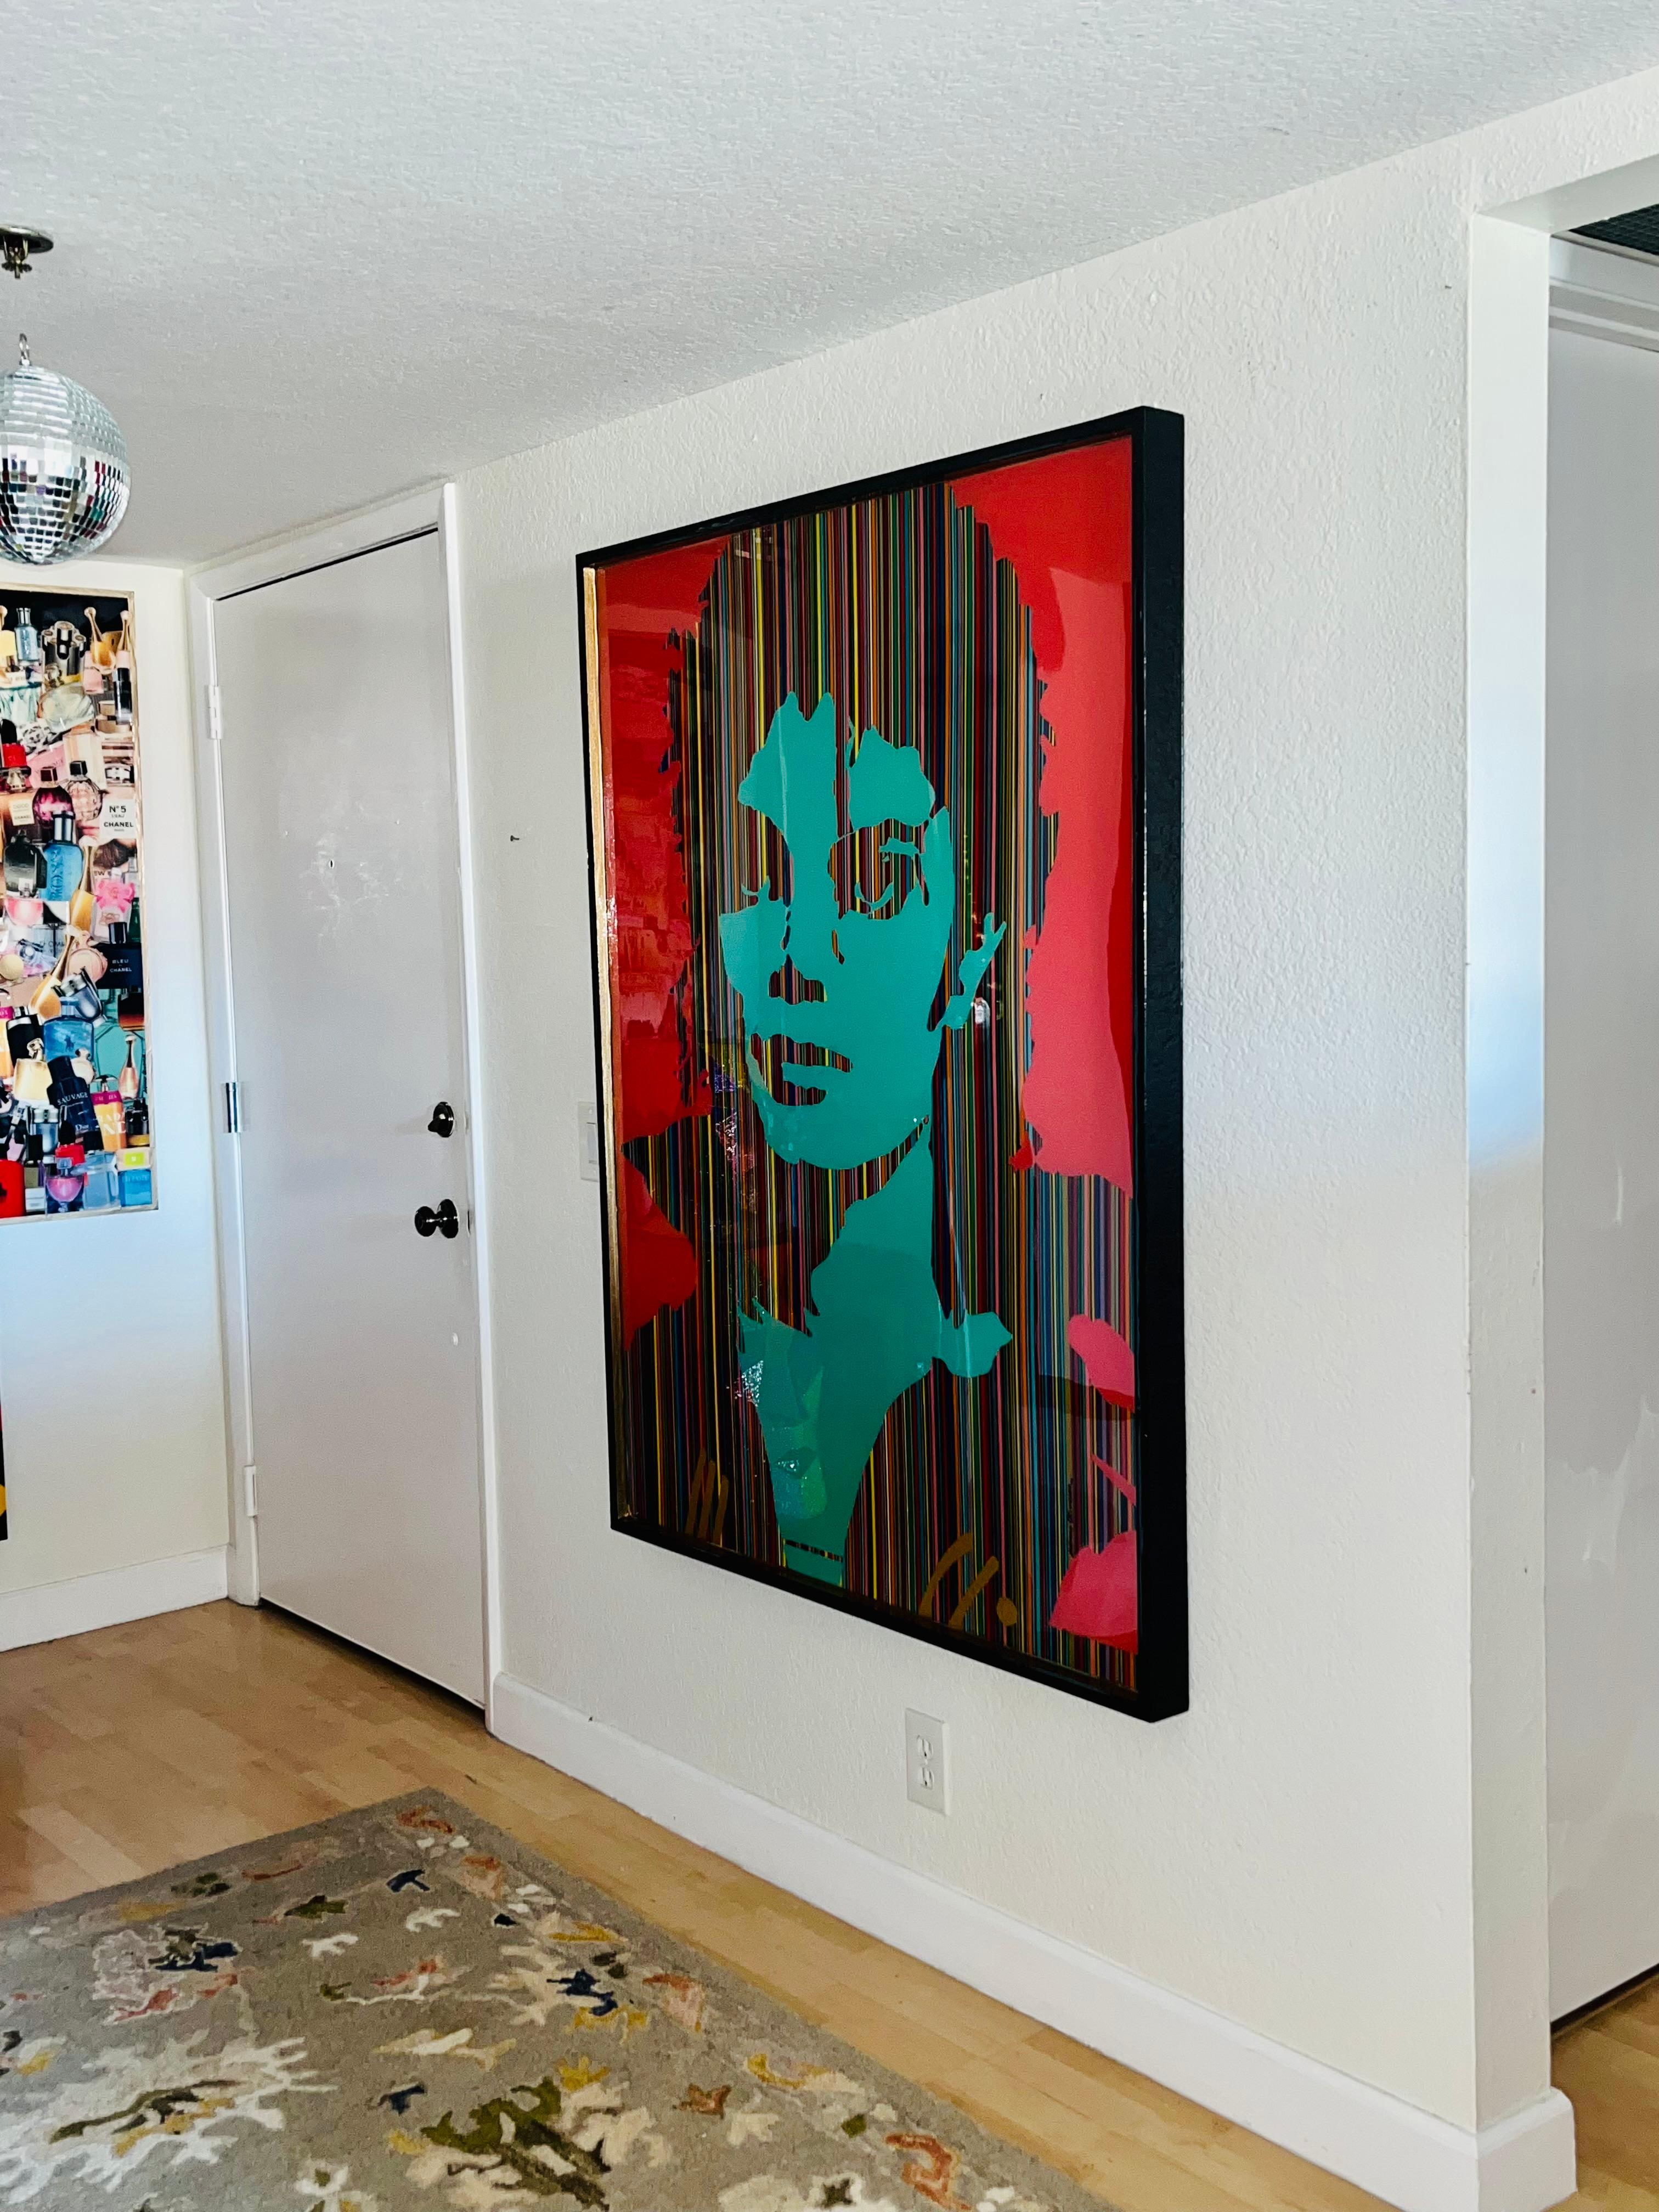                **ANNUAL SUPER SALE UNTIL JUNE 15th ONLY**
*This Price Won't Be Repeated Again This Year - Take Advantage Of It*

King of Pop II by Mauro Oliveira, signed. 

Celebrating the King of Pop Michael Jackson with this very special piece.